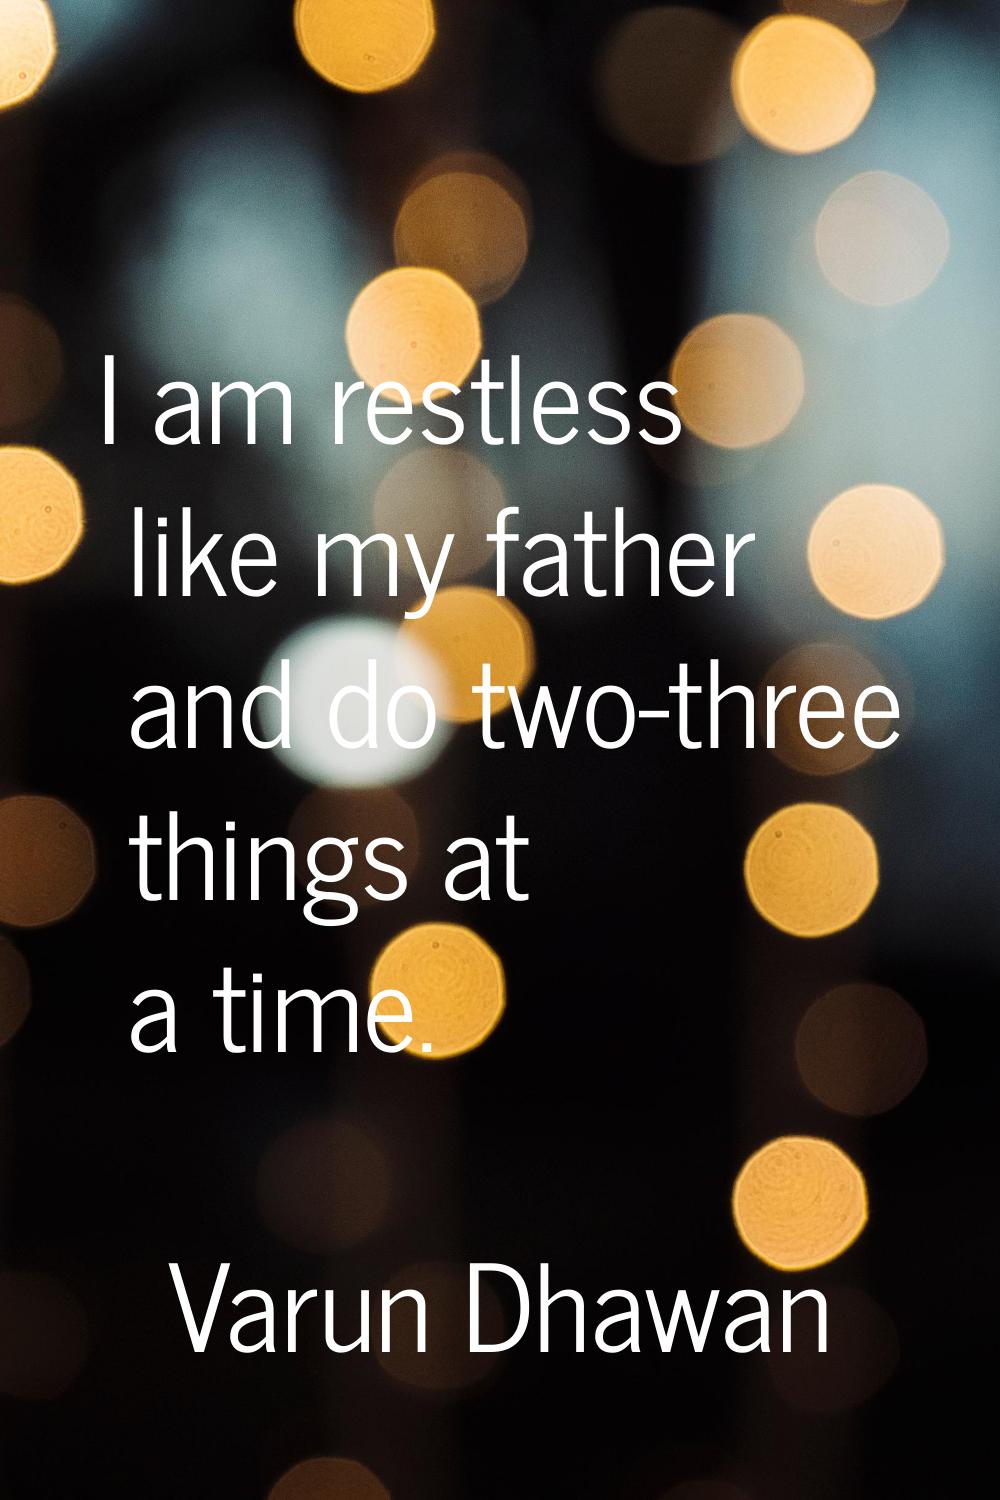 I am restless like my father and do two-three things at a time.